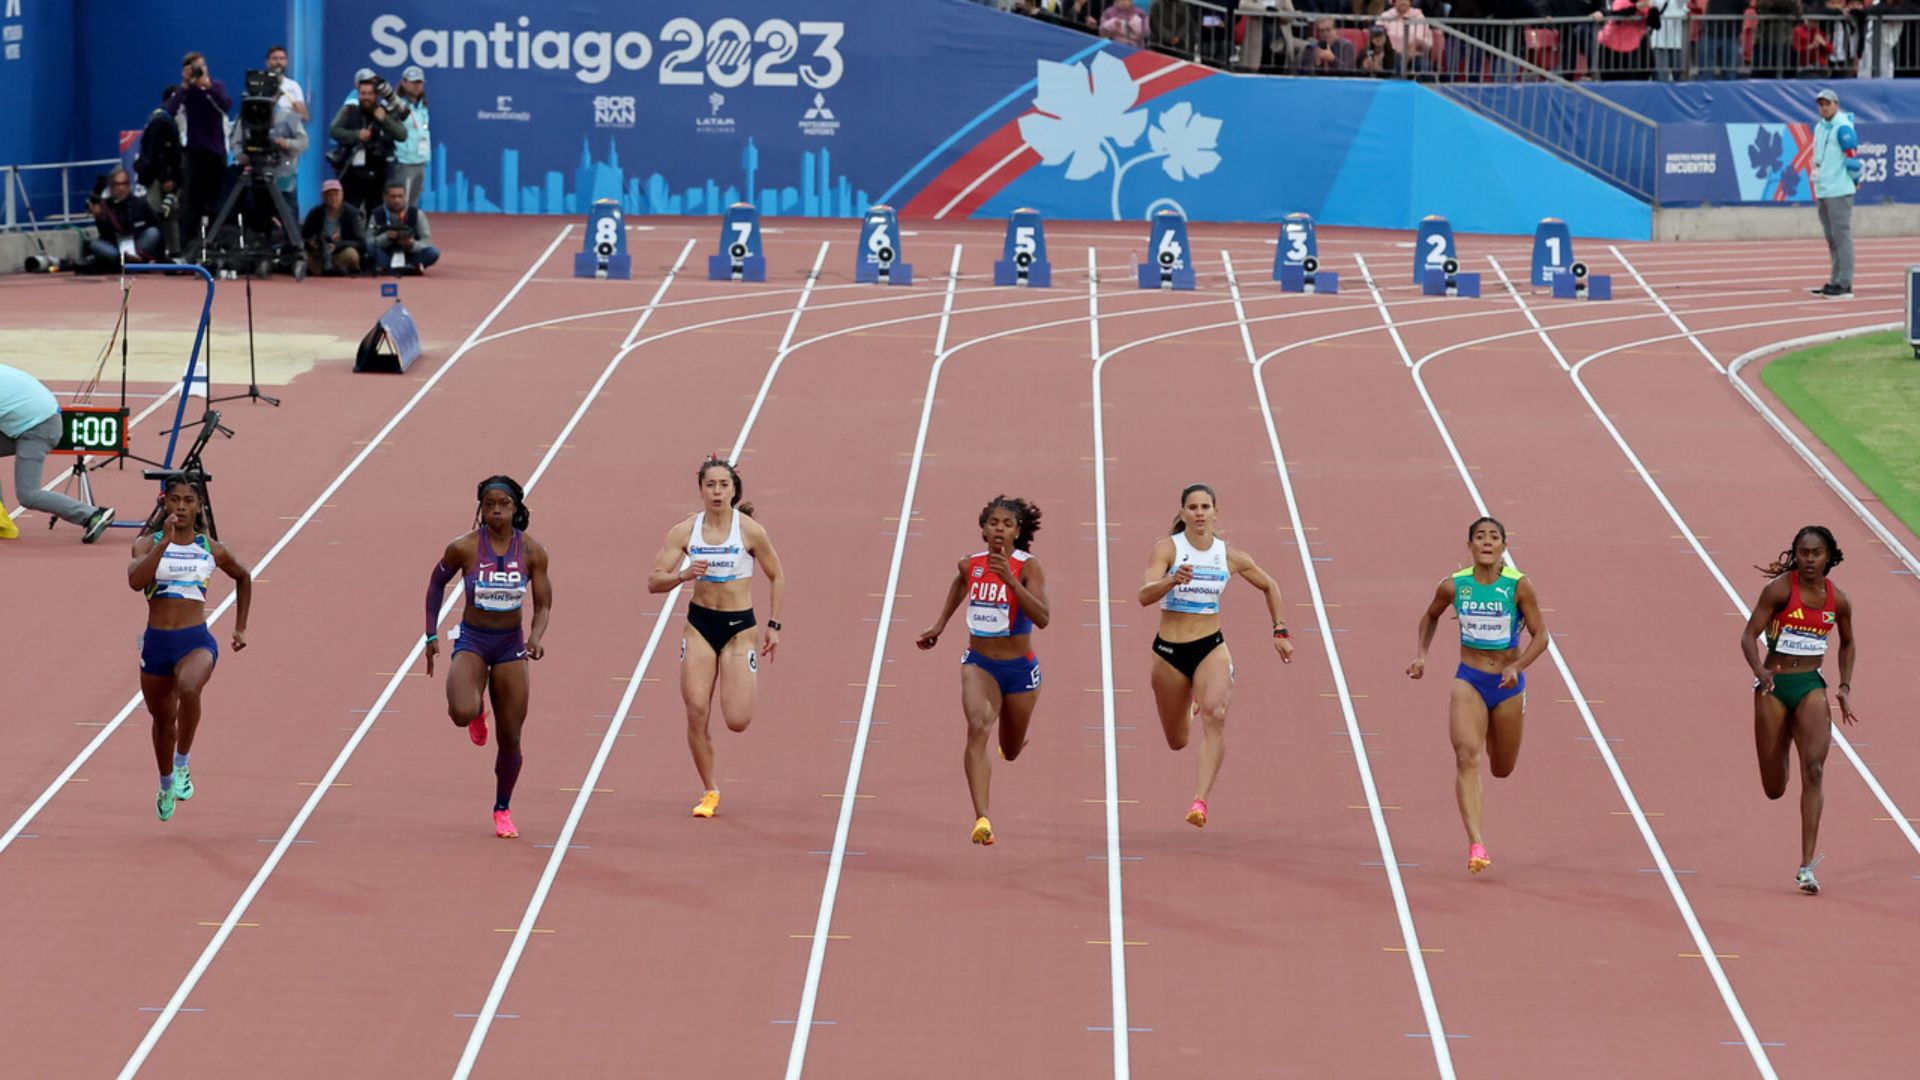 100-Meter Finals Stand Out on Tuesday's Schedule